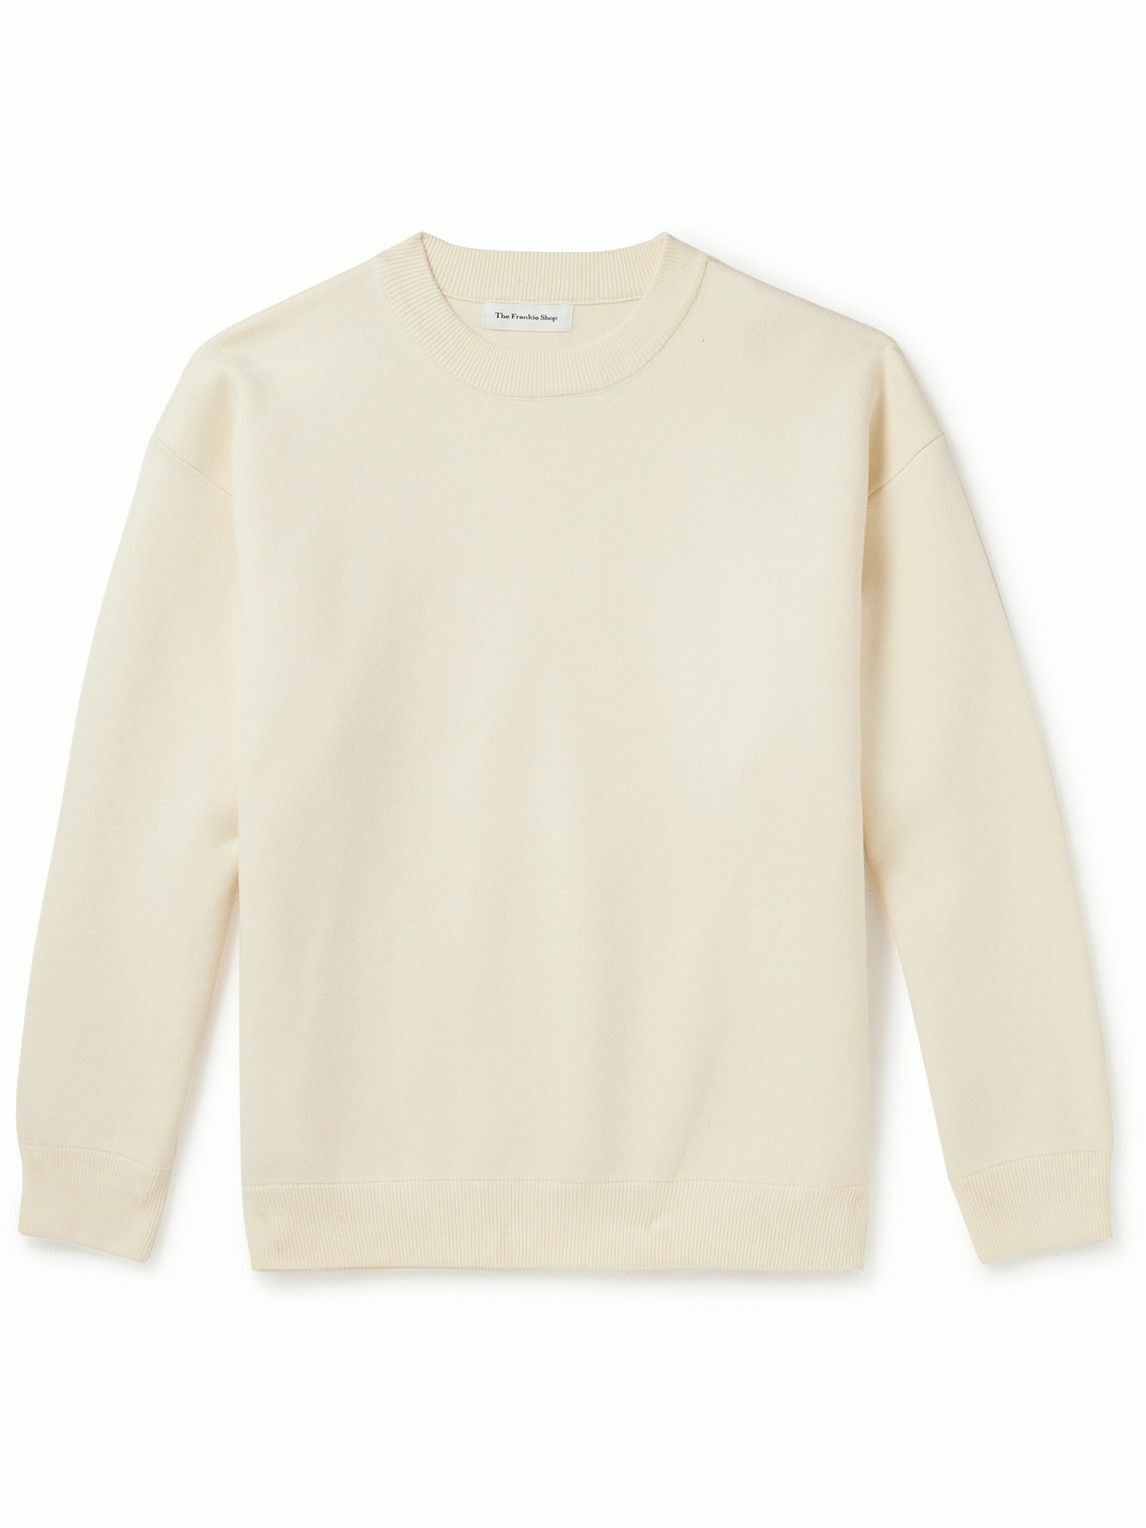 Photo: The Frankie Shop - Arne Oversized Knitted Sweater - Neutrals